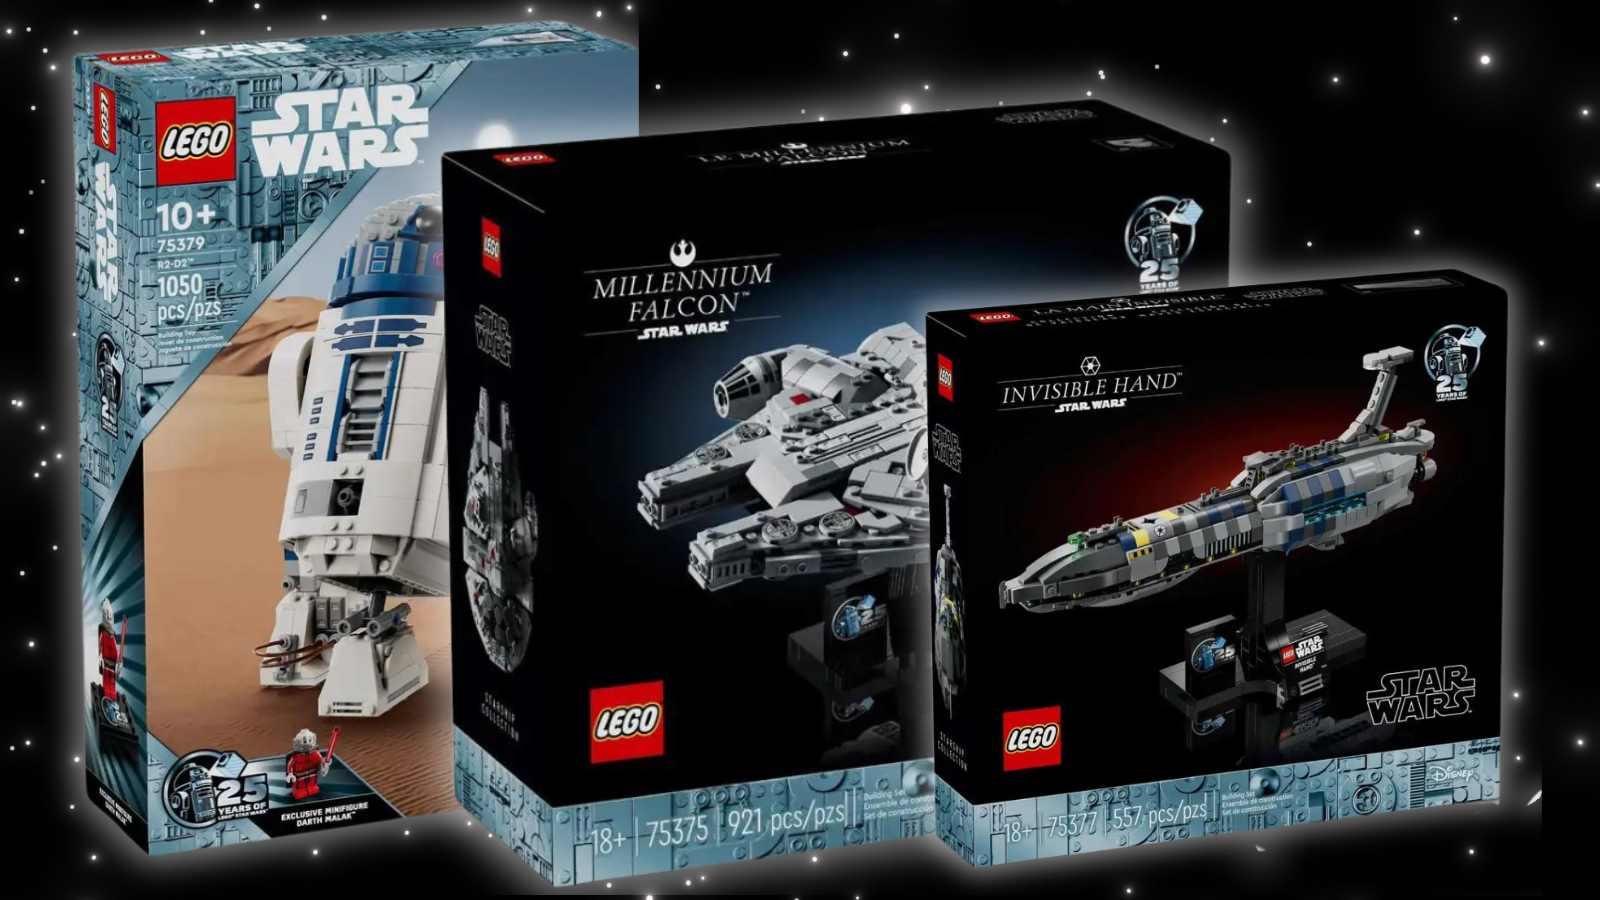 Three of the new LEGO Star Wars 25th anniversary sets that are now available to pre-order from LEGO.